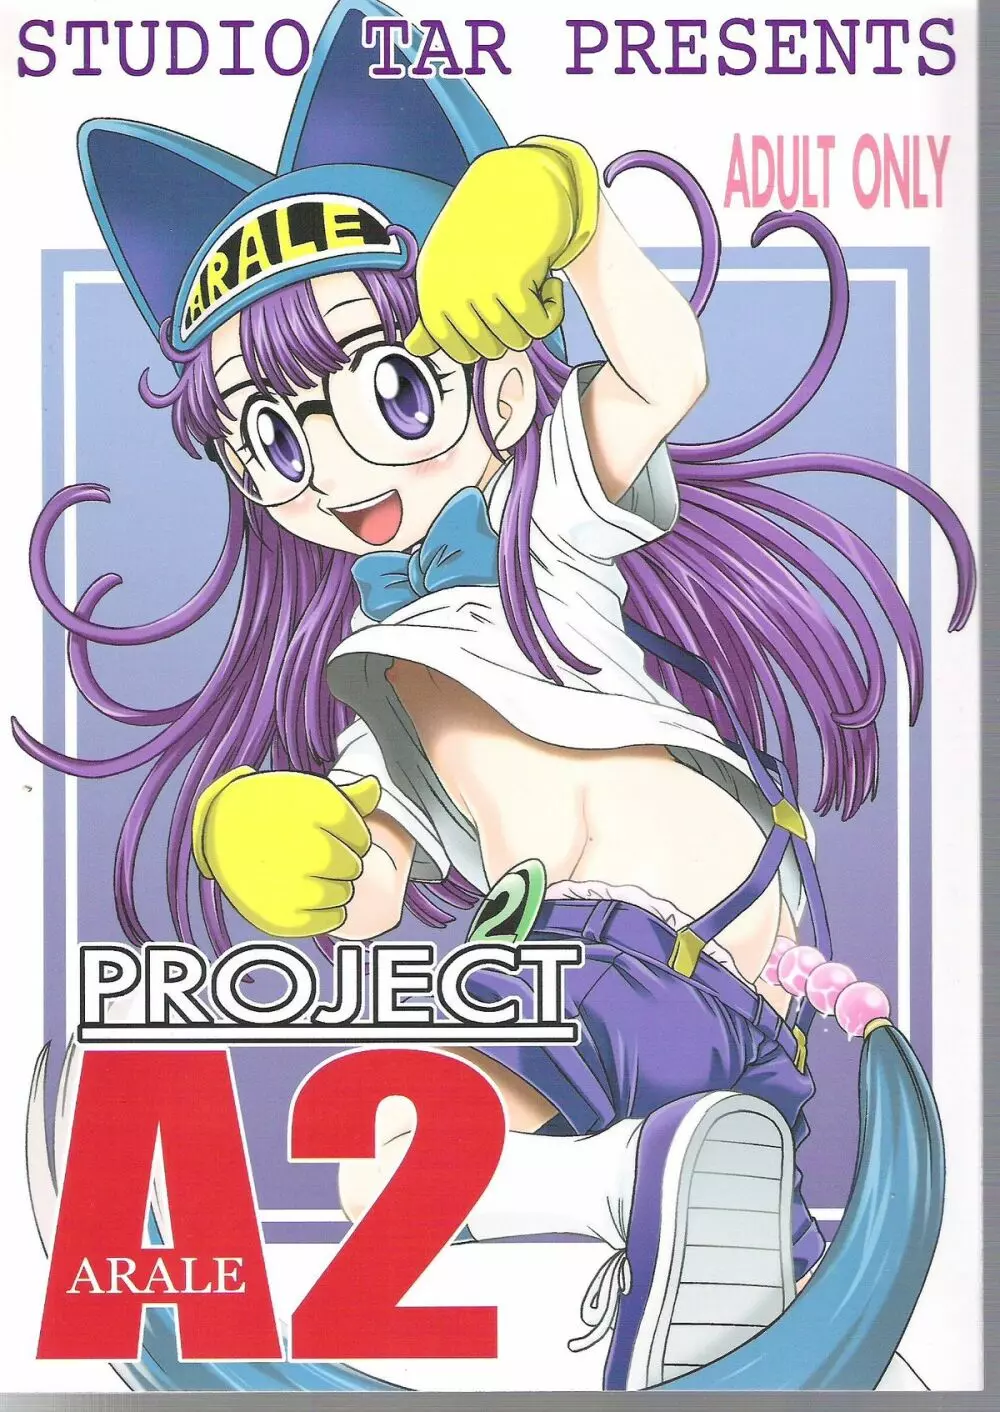 PROJECT ARALE 2 - page1